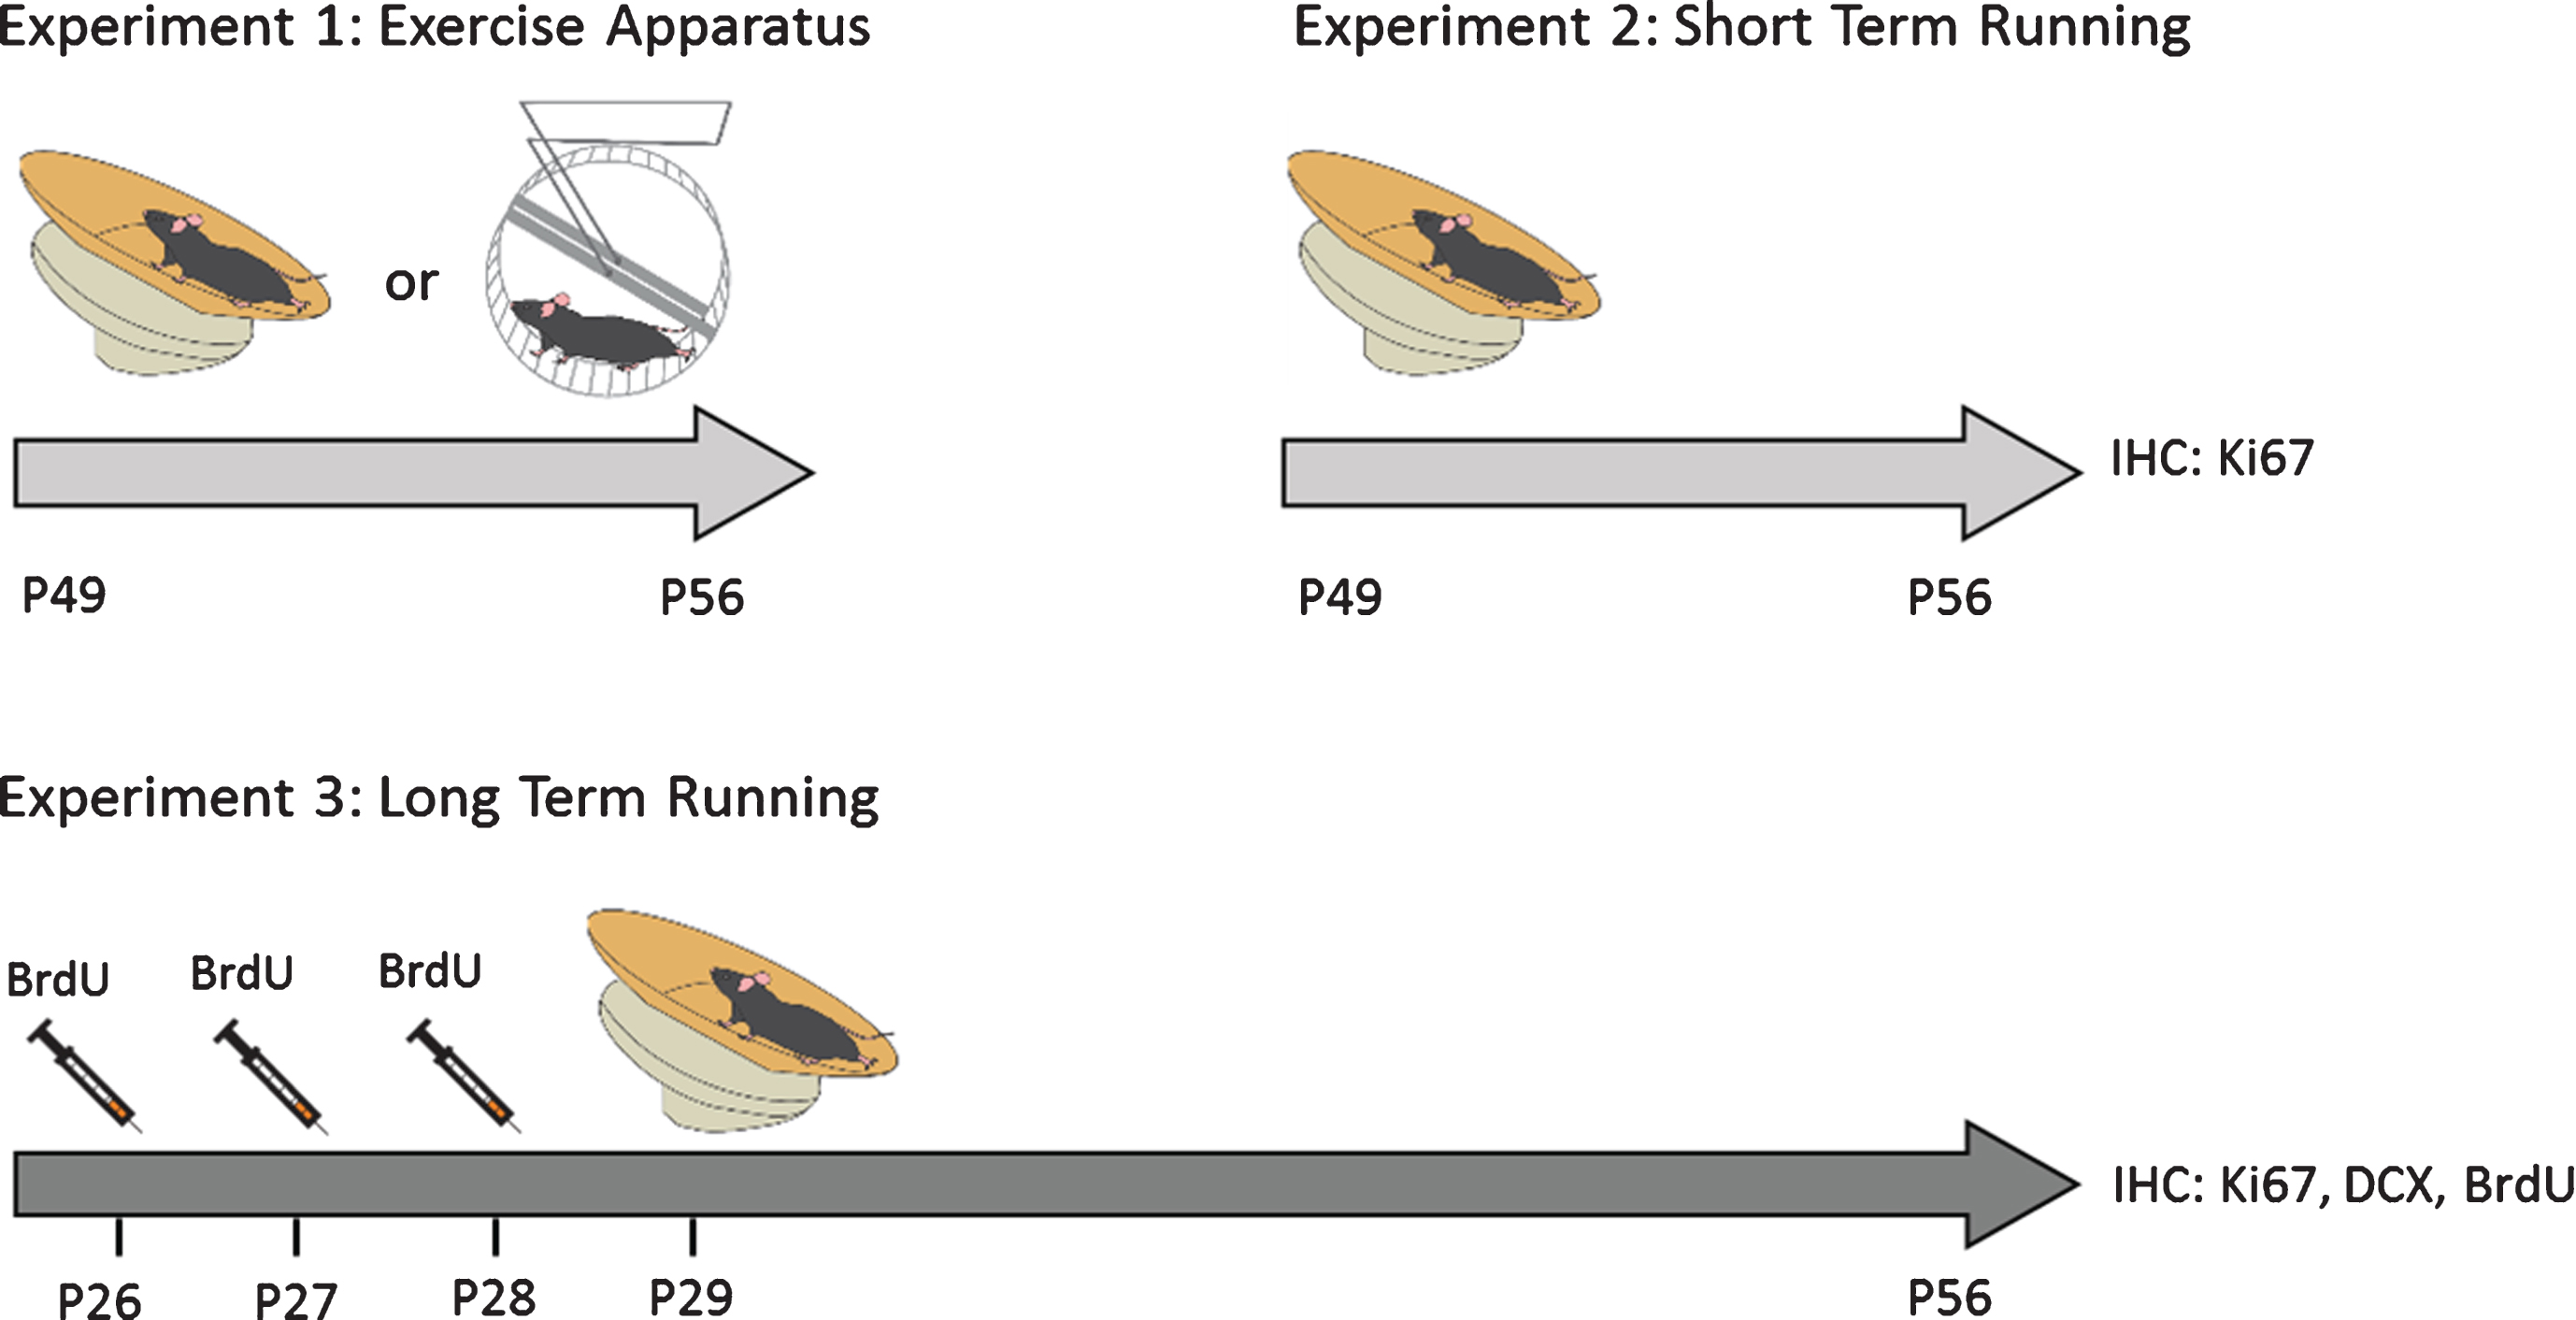 Experimental Design. Male Fmr1 knockout (KO) and wild-type (WT) were given free access to a running dish or wheel starting at either postnatal day (PND) 29 or PND49 for 1 week (short-term running) or 4 weeks (long-term running). To study the effect of long-term running on cell survival, mice were injected with BrdU (100 mg/kg) daily for 3 days prior to voluntary running in order to labelproliferating cells.